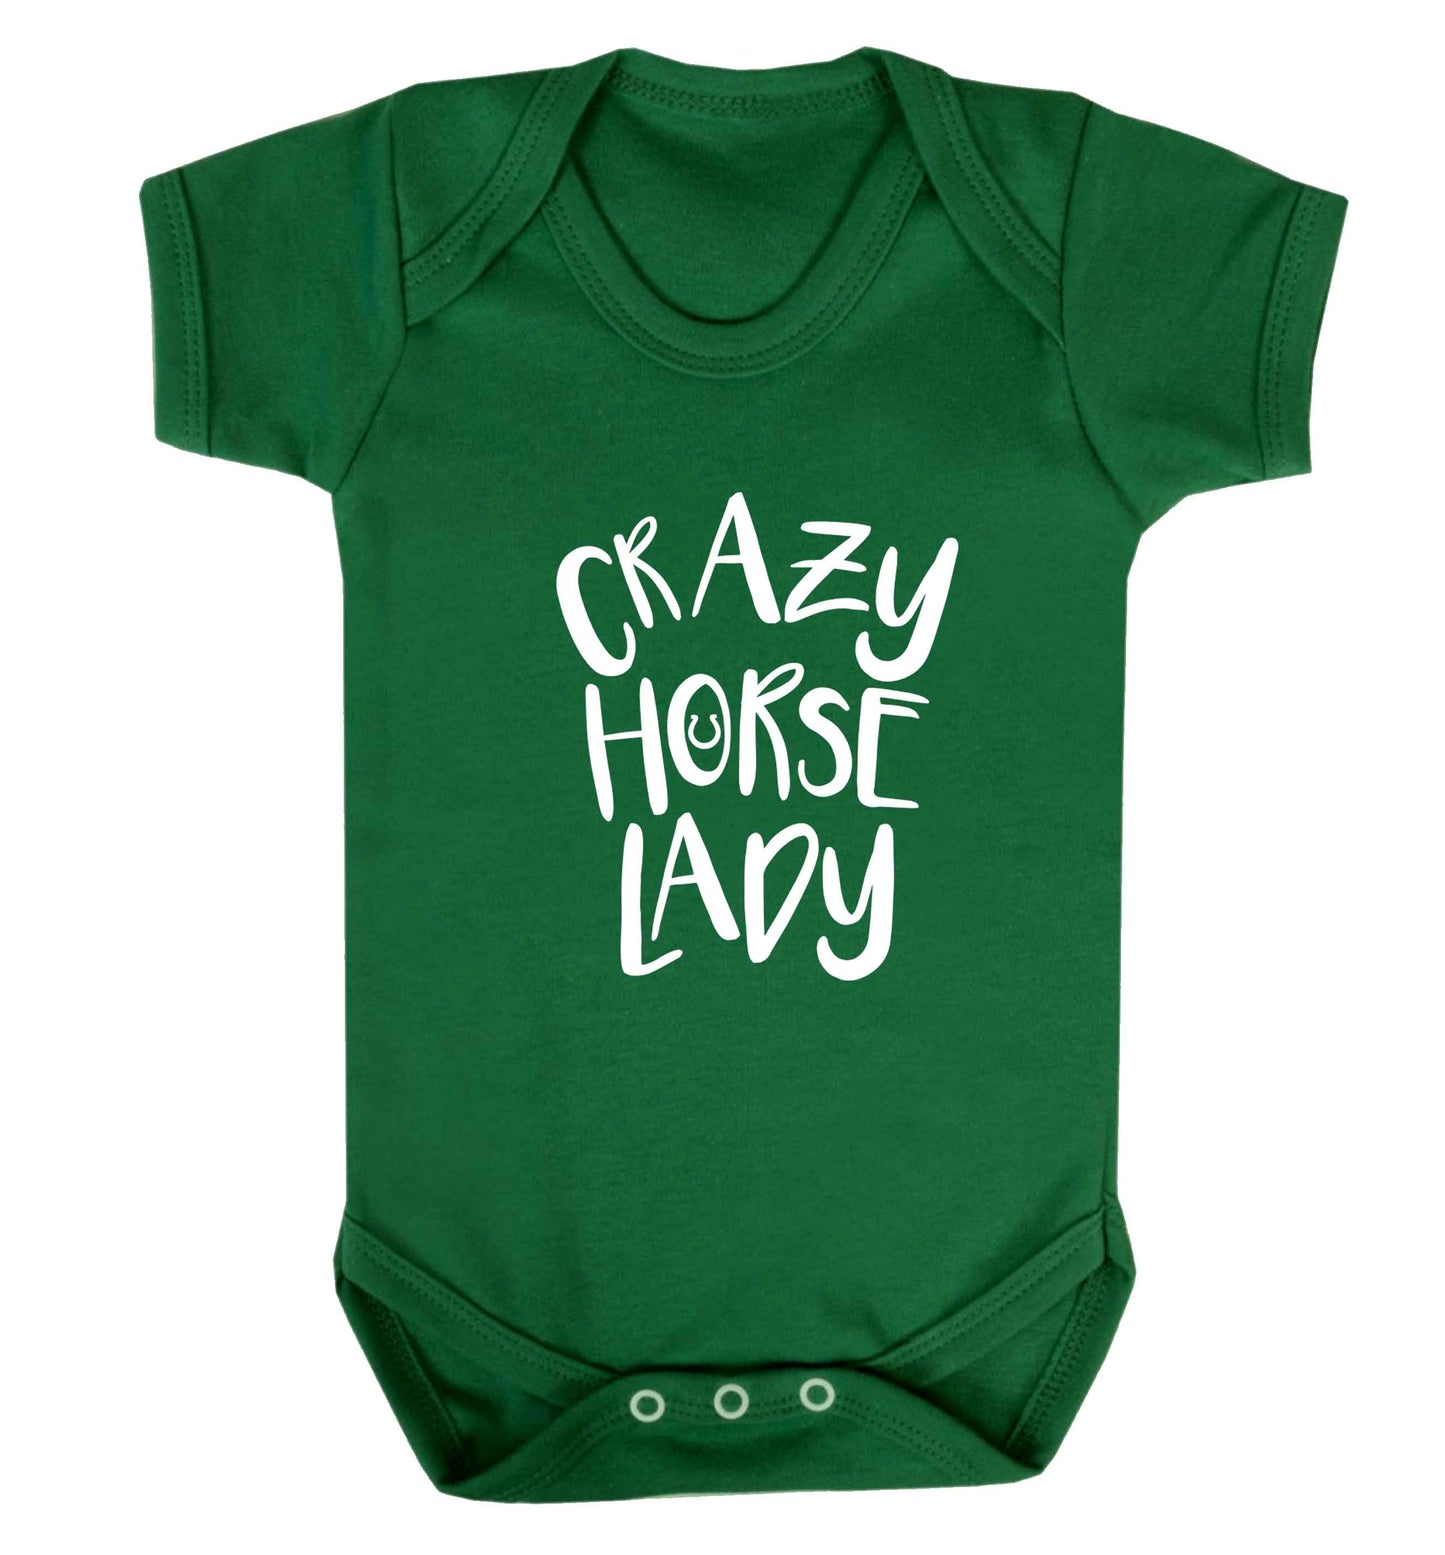 Crazy horse lady baby vest green 18-24 months